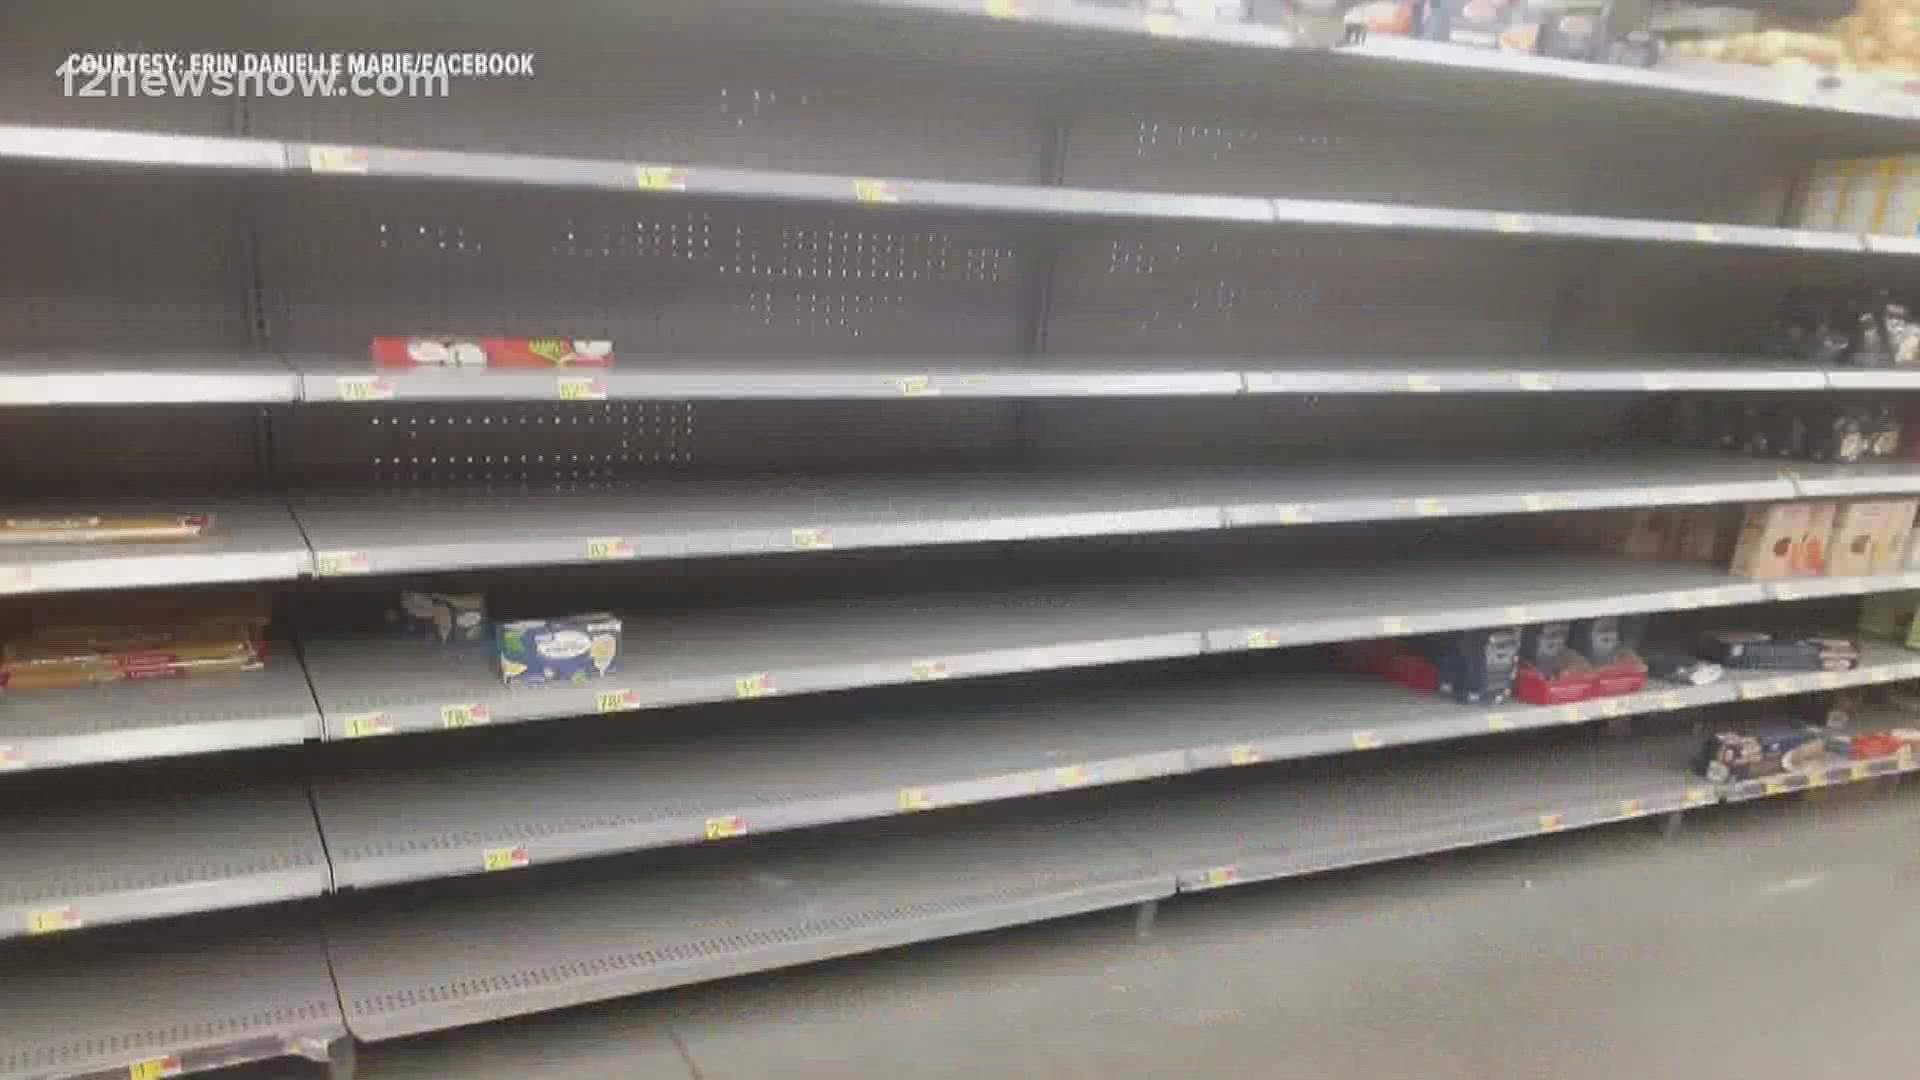 If you've been to the grocery store lately, you may have had to pack your patience. Shoppers are experiencing empty shelves, and some favorite items are missing.